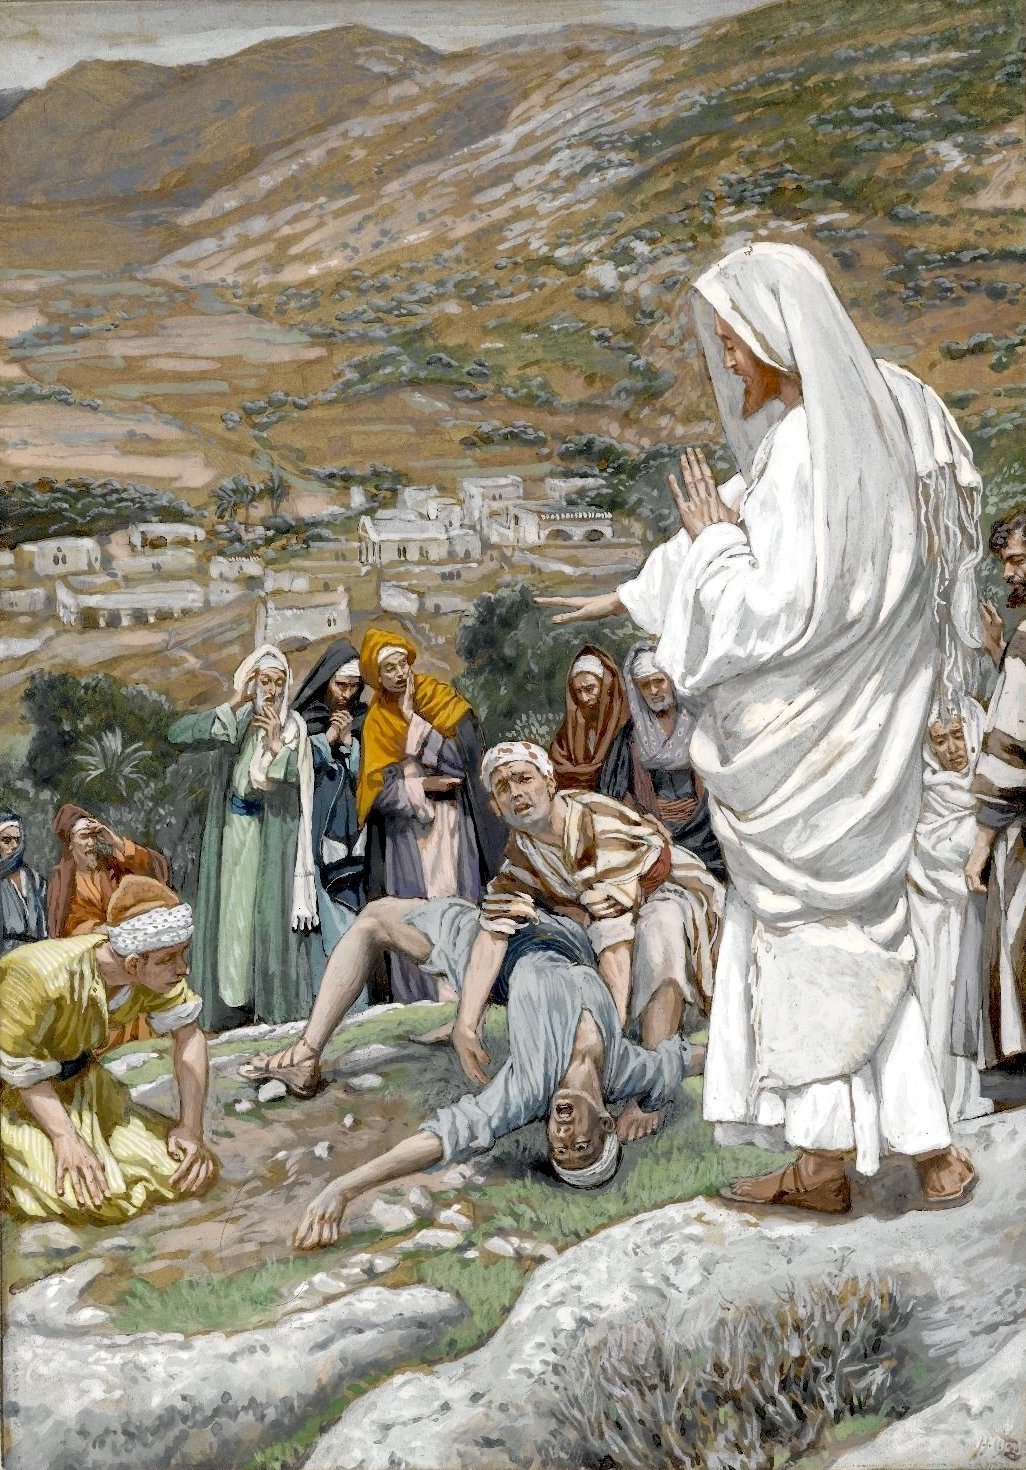 The Soul's Healing - A Sermon for the 10th Sunday after Pentecost (2022) - Holy Cross Monastery